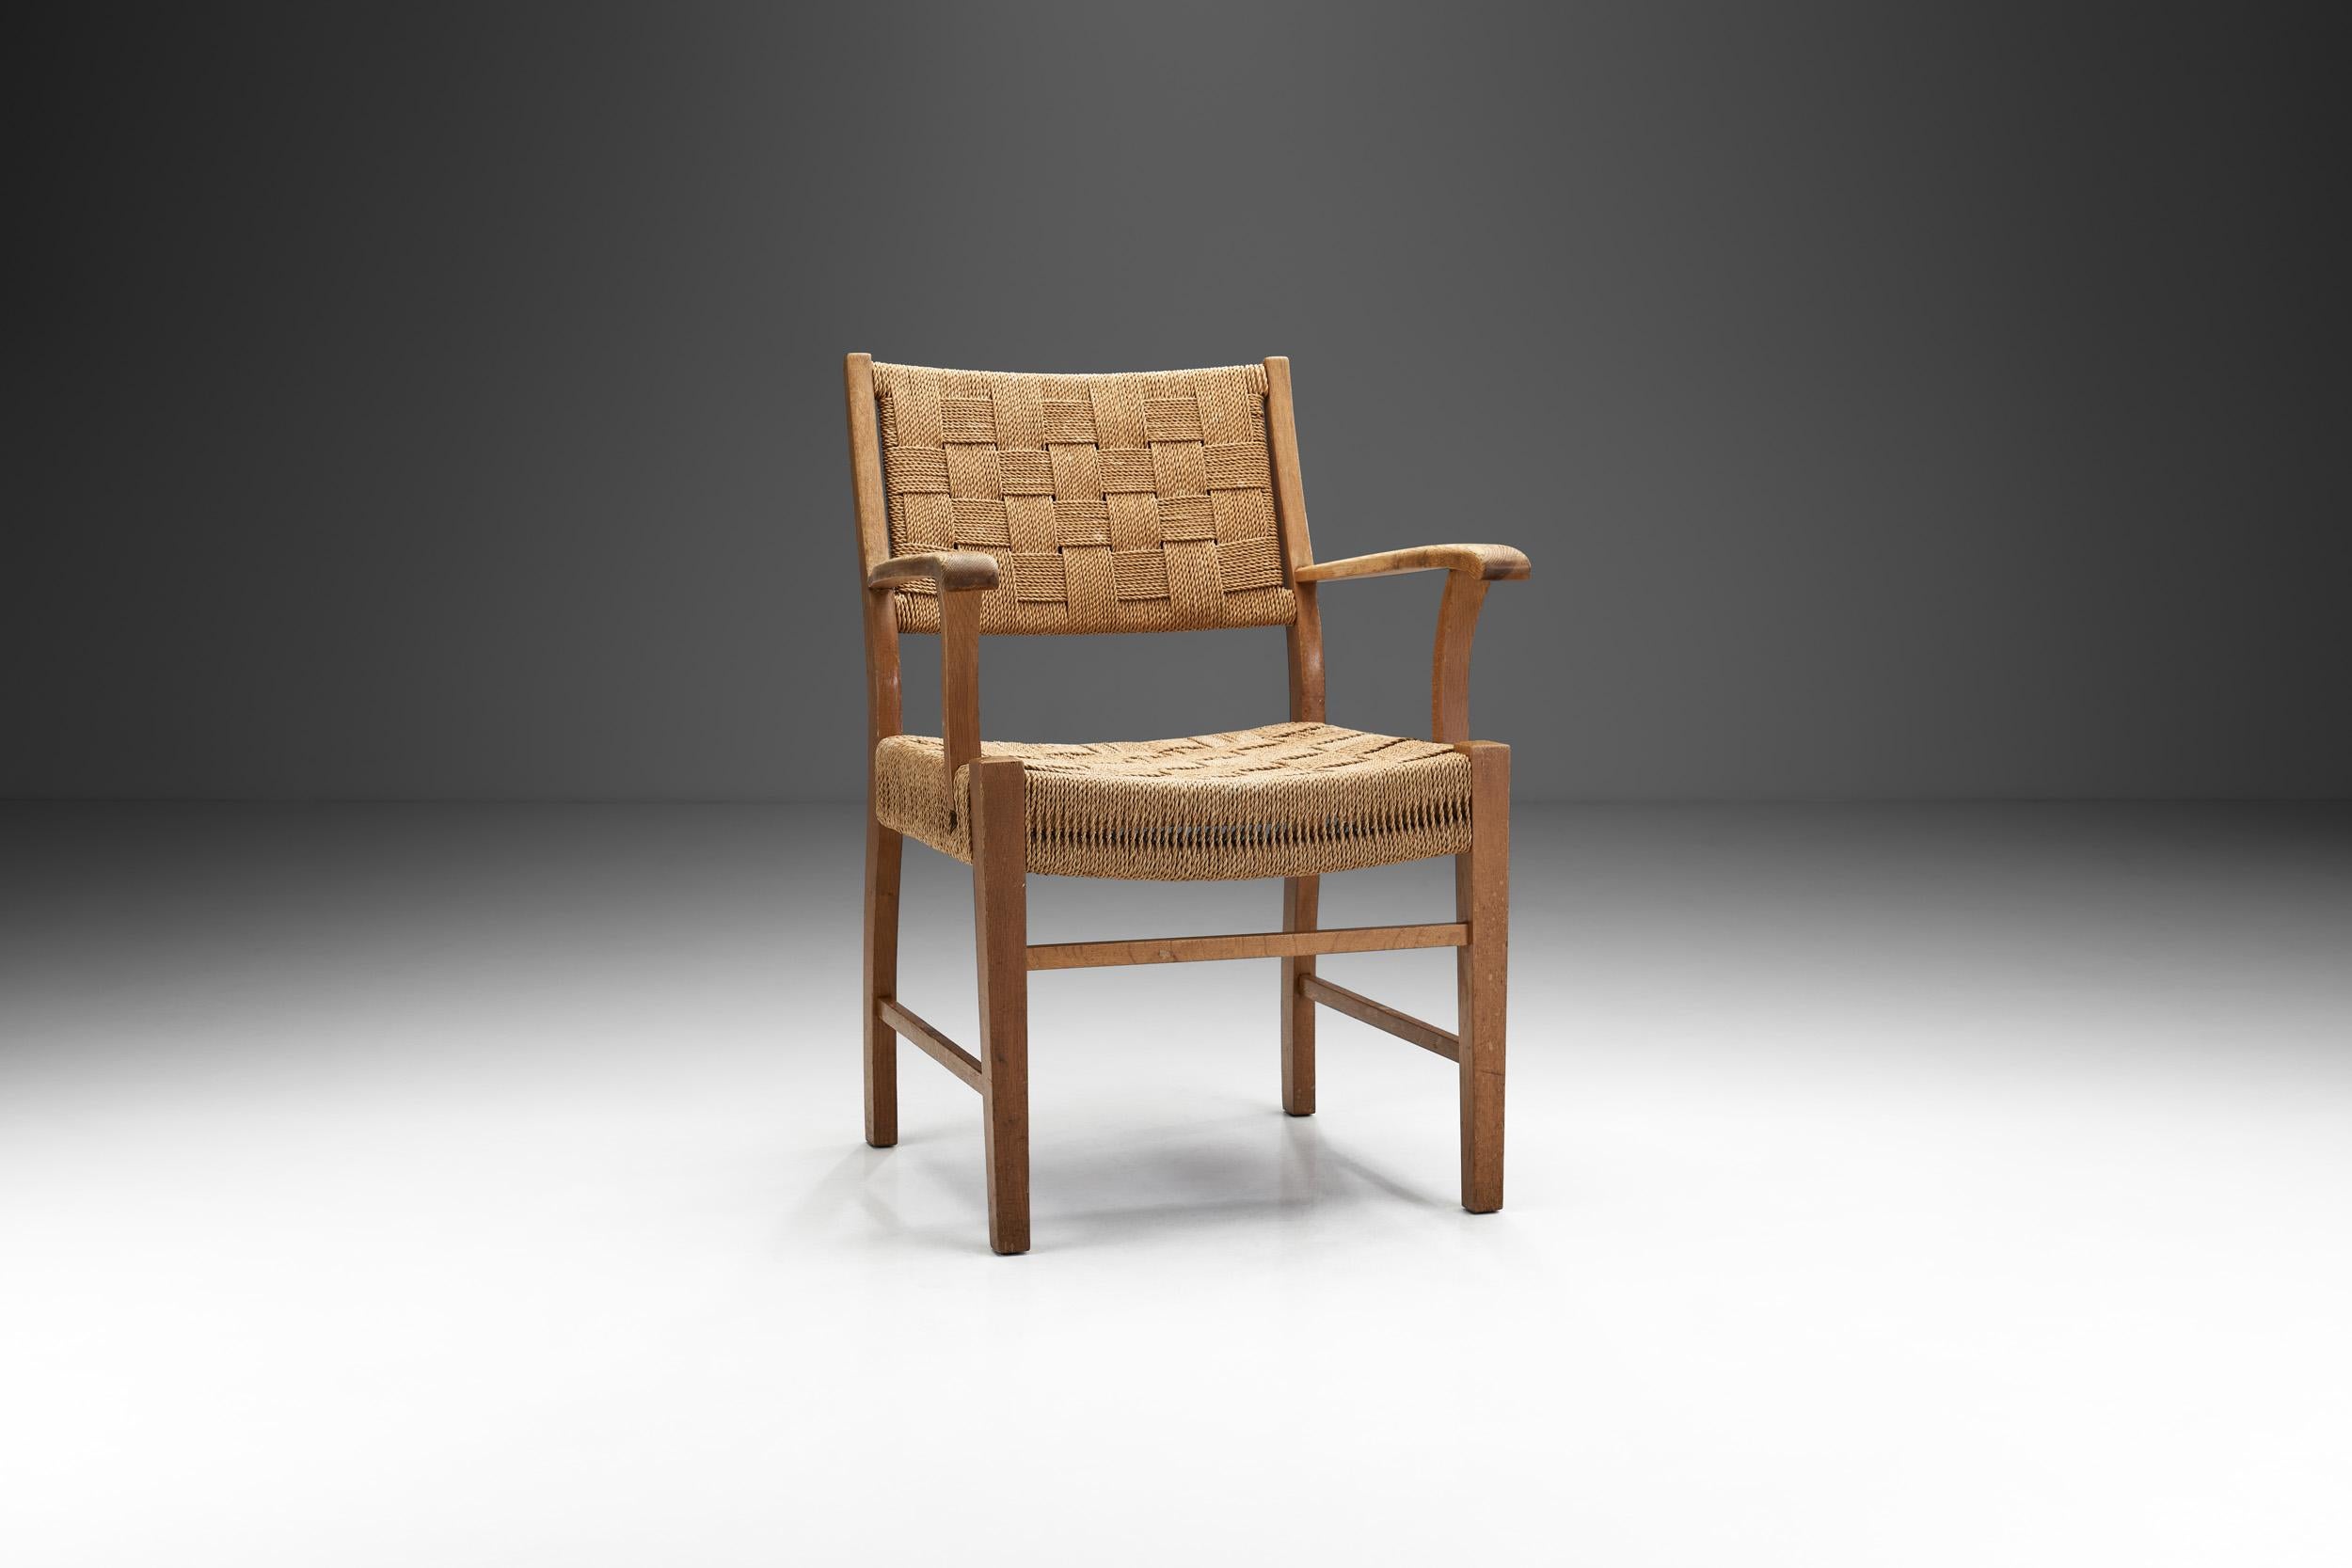 Early Danish Modern cemented the Scandinavian design principles of quality, functionality, and an unadorned, understated look. Accordingly, this chair is defined by its materials, the finely worked oak and woven cord.

This classic armchair stands